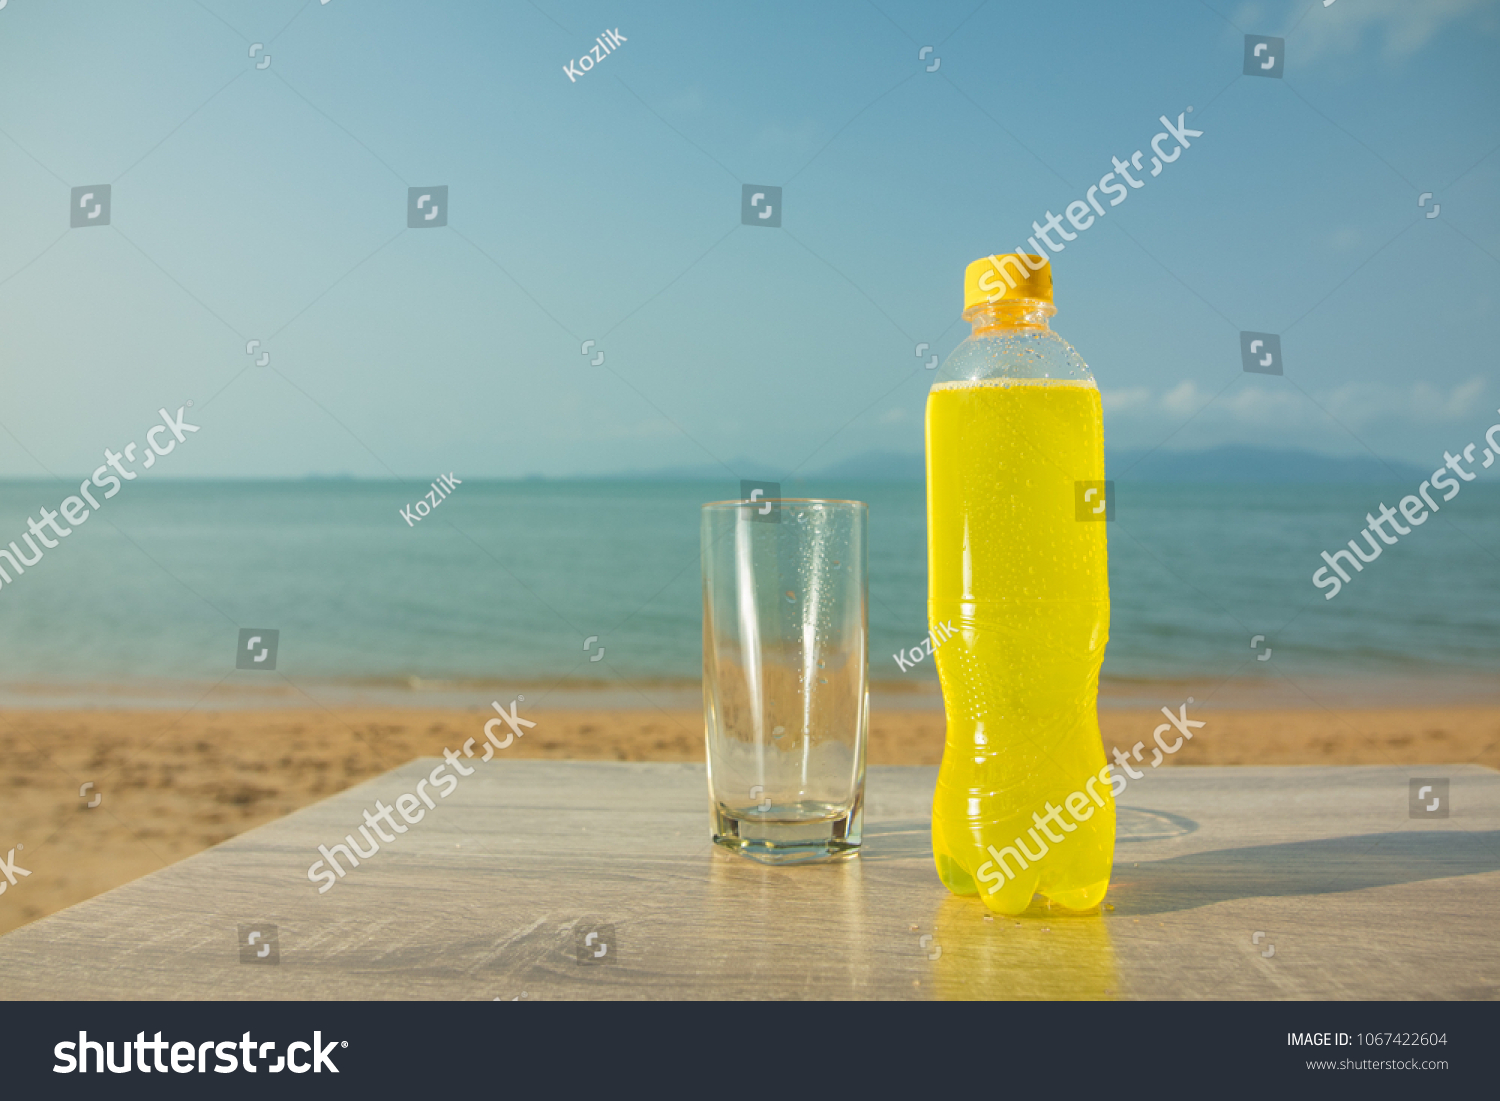 Download Bottles Multicolored Drinks Yellow Red Green Stock Photo Edit Now 1067422604 PSD Mockup Templates